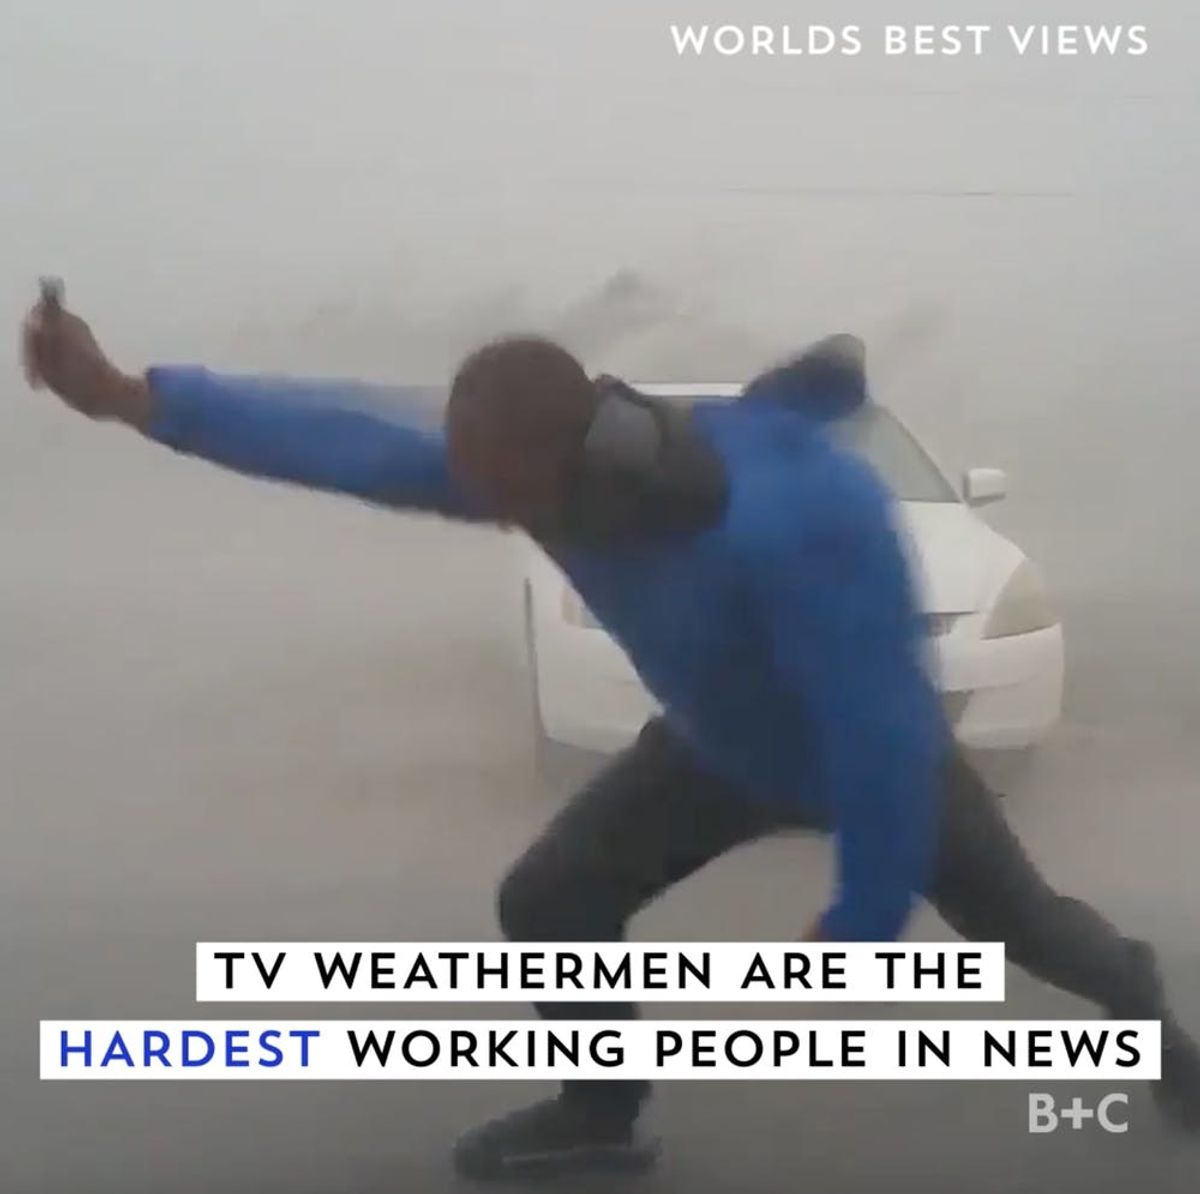 These Weathermen are dedicated AF